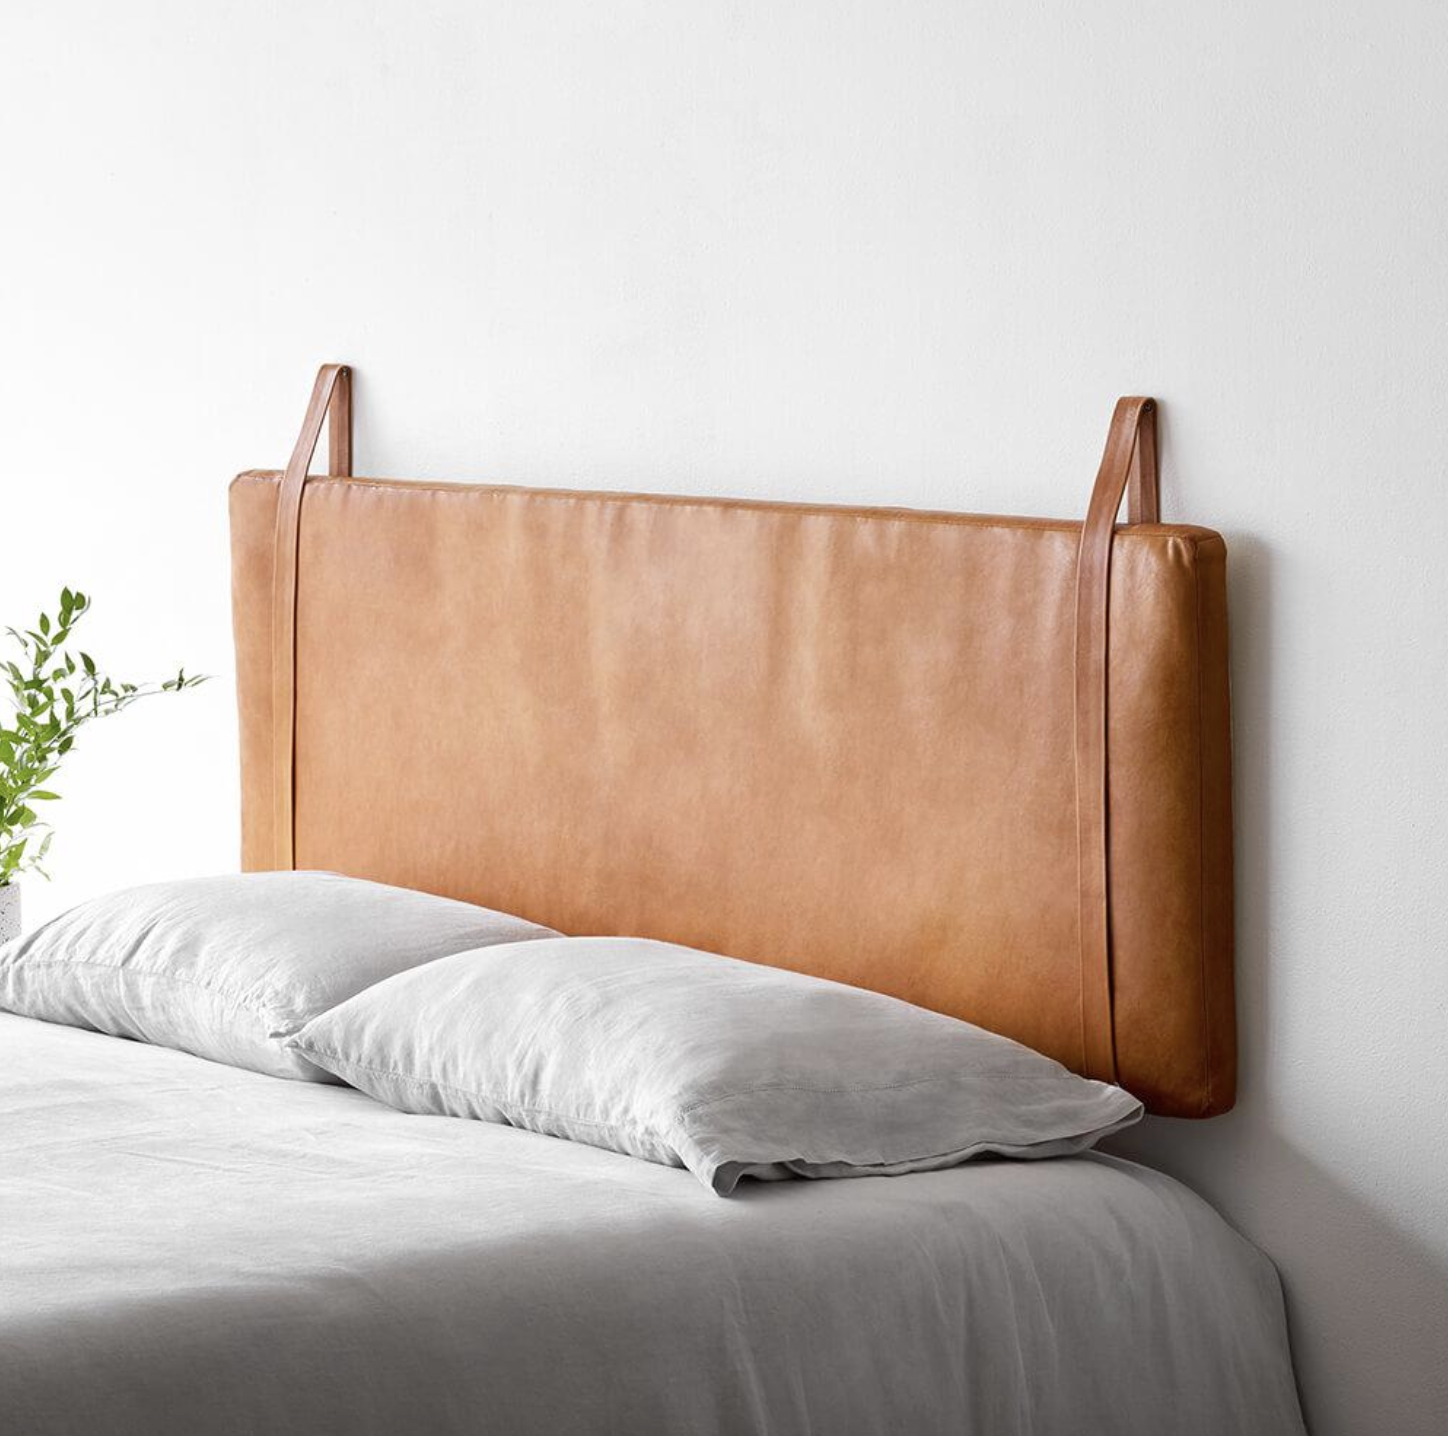 9 Wall Mounted Floating Headboards We, Attach A Headboard To The Wall